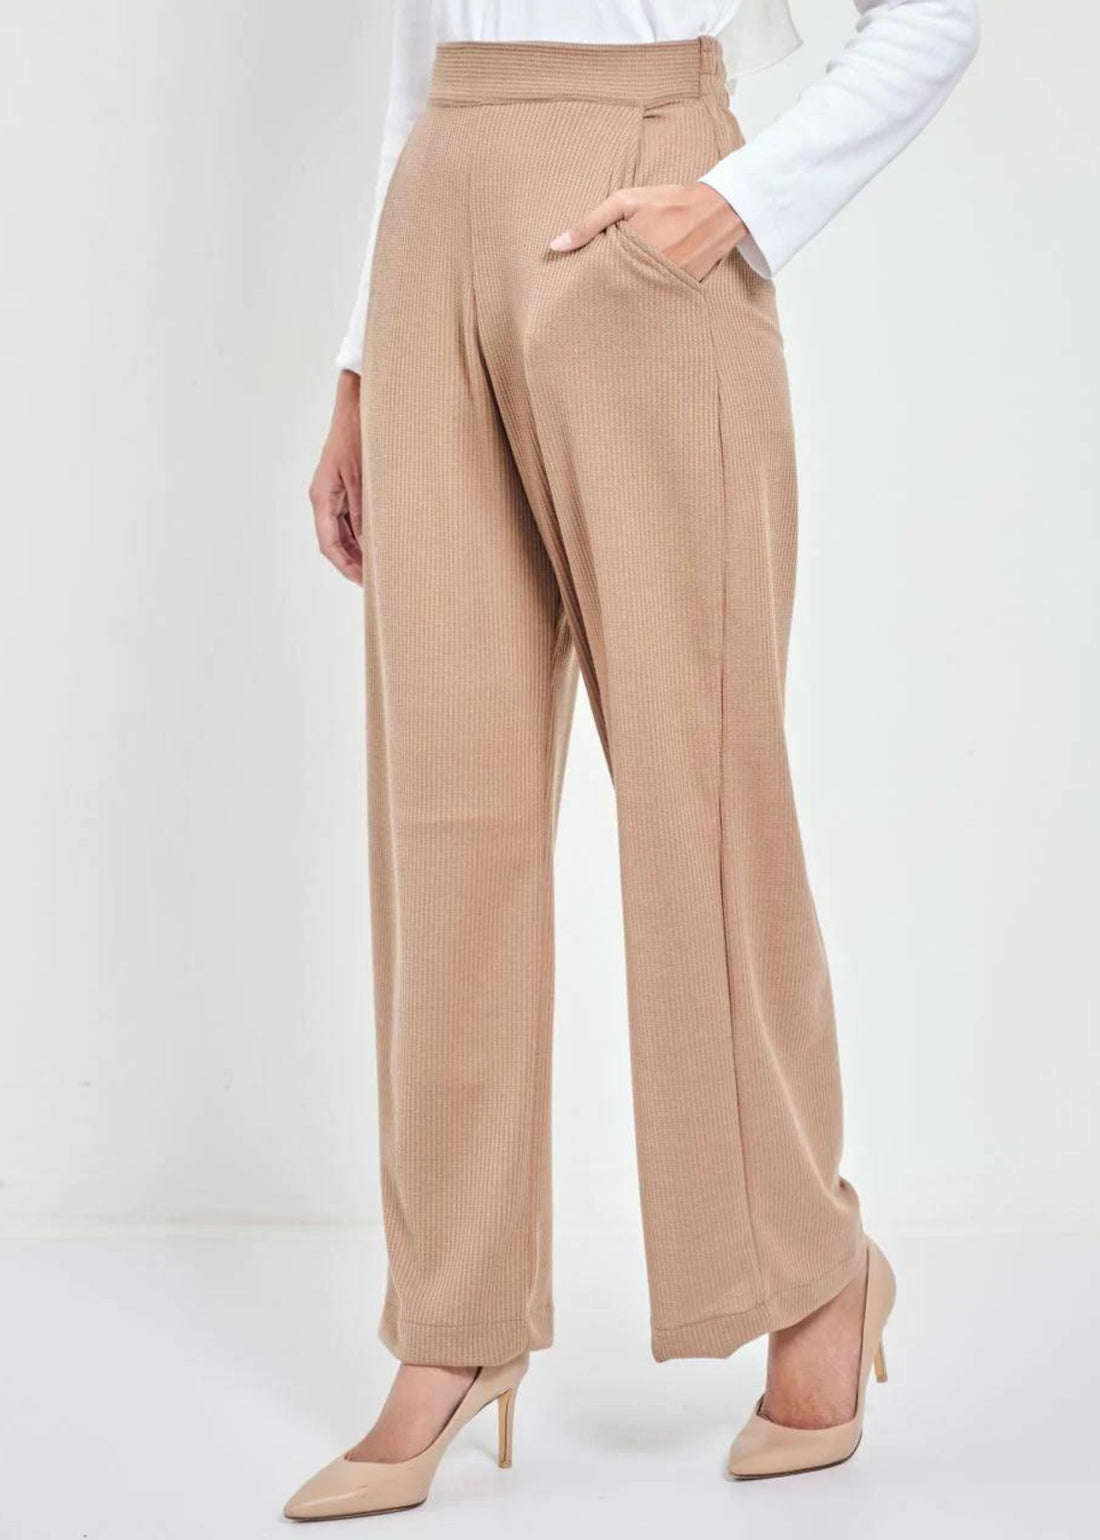 DONNA Straight Cut Pants in Cocoa Brown